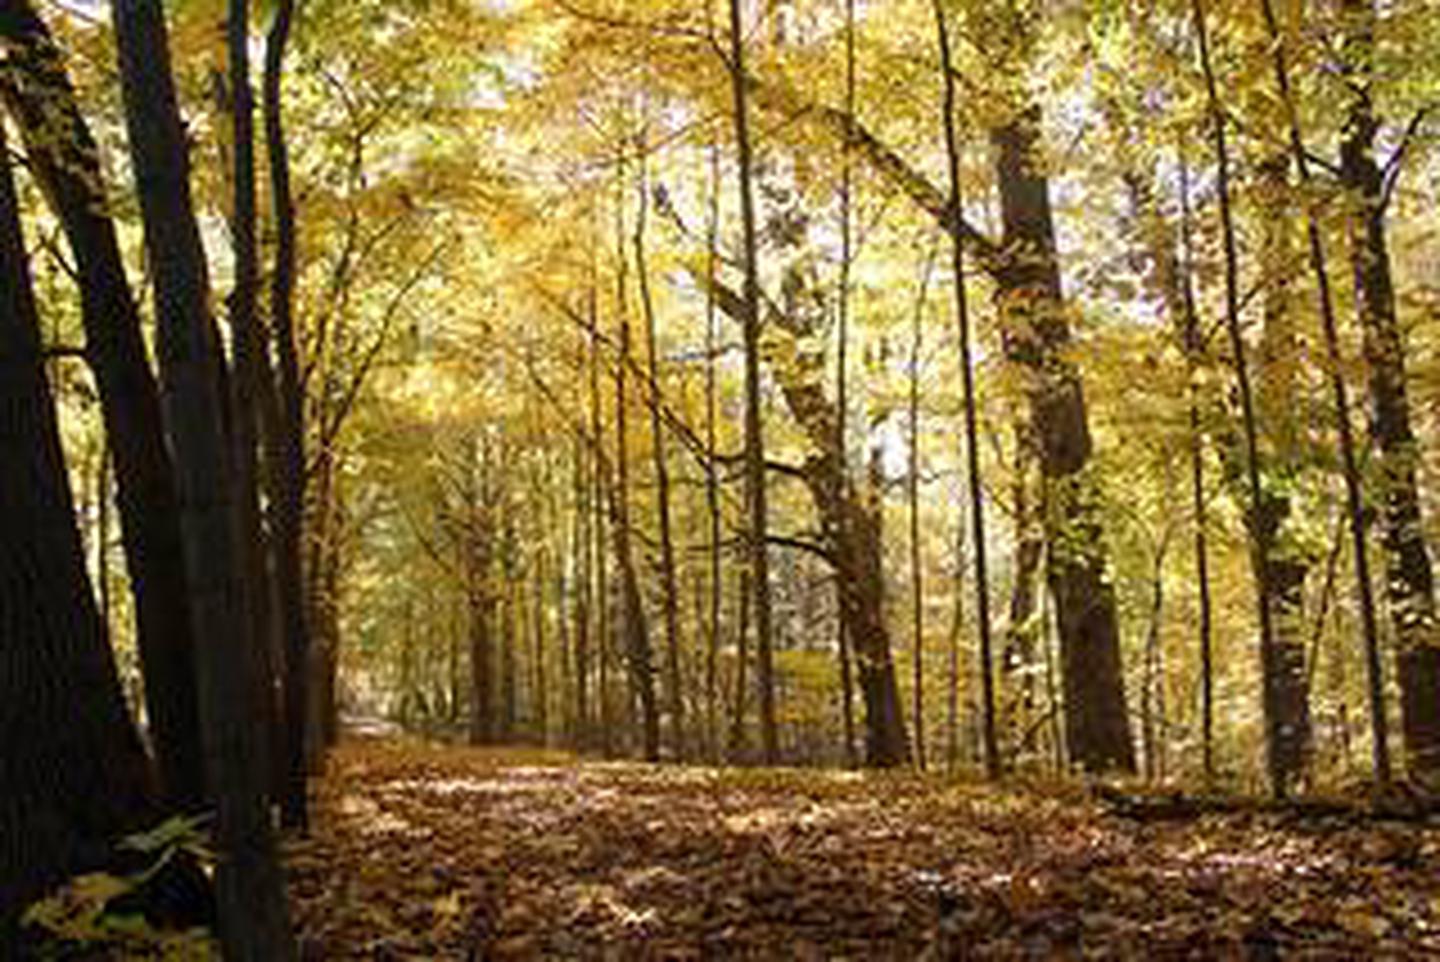 Chellberg Farm Trail in the fall in Indiana Dunes National Lakeshore.